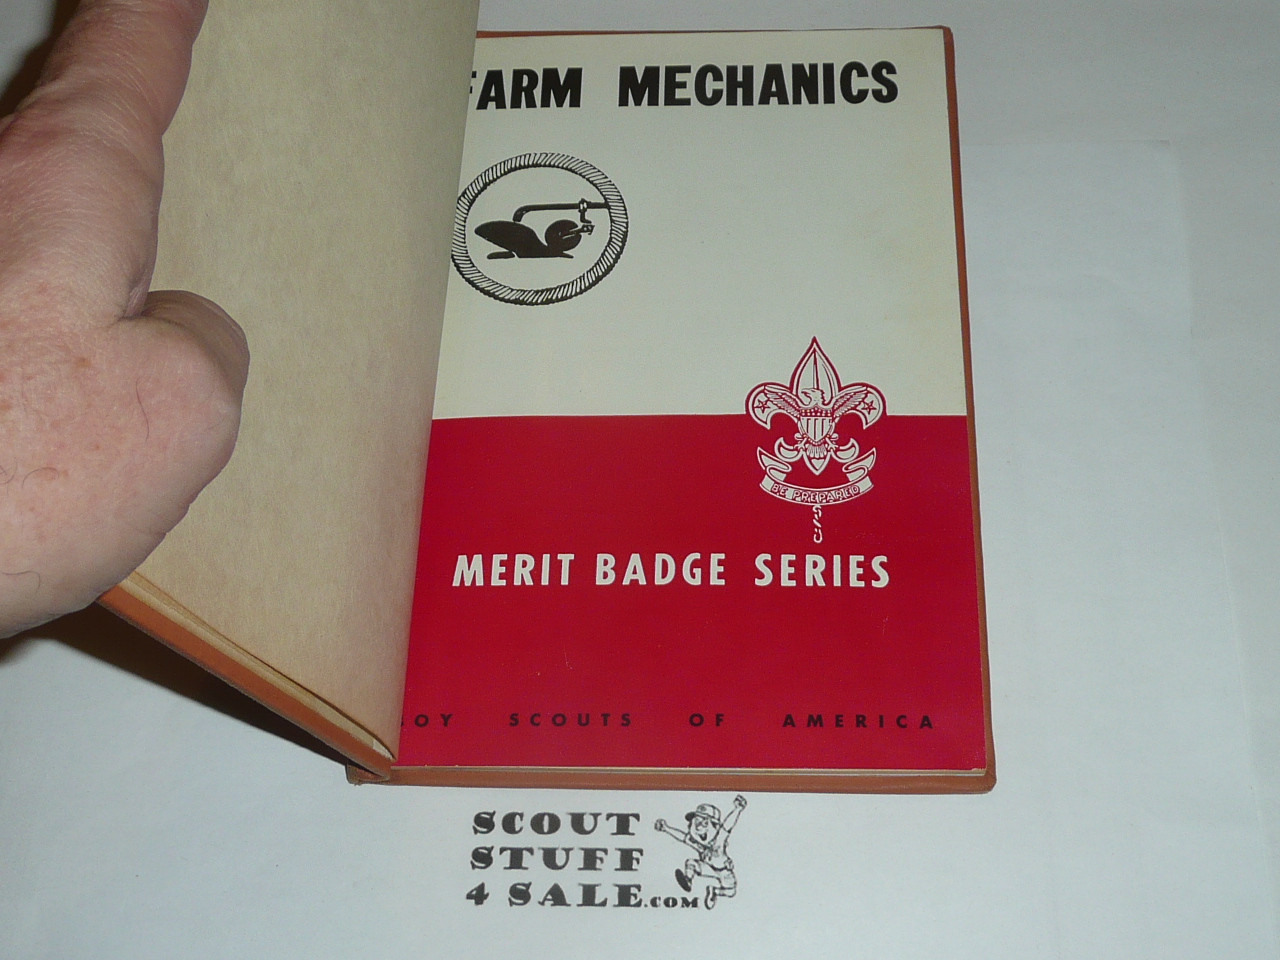 Farm Mechanics Library Bound Merit Badge Pamphlet, Type 5, Red/Wht Cover, 11-51 Printing